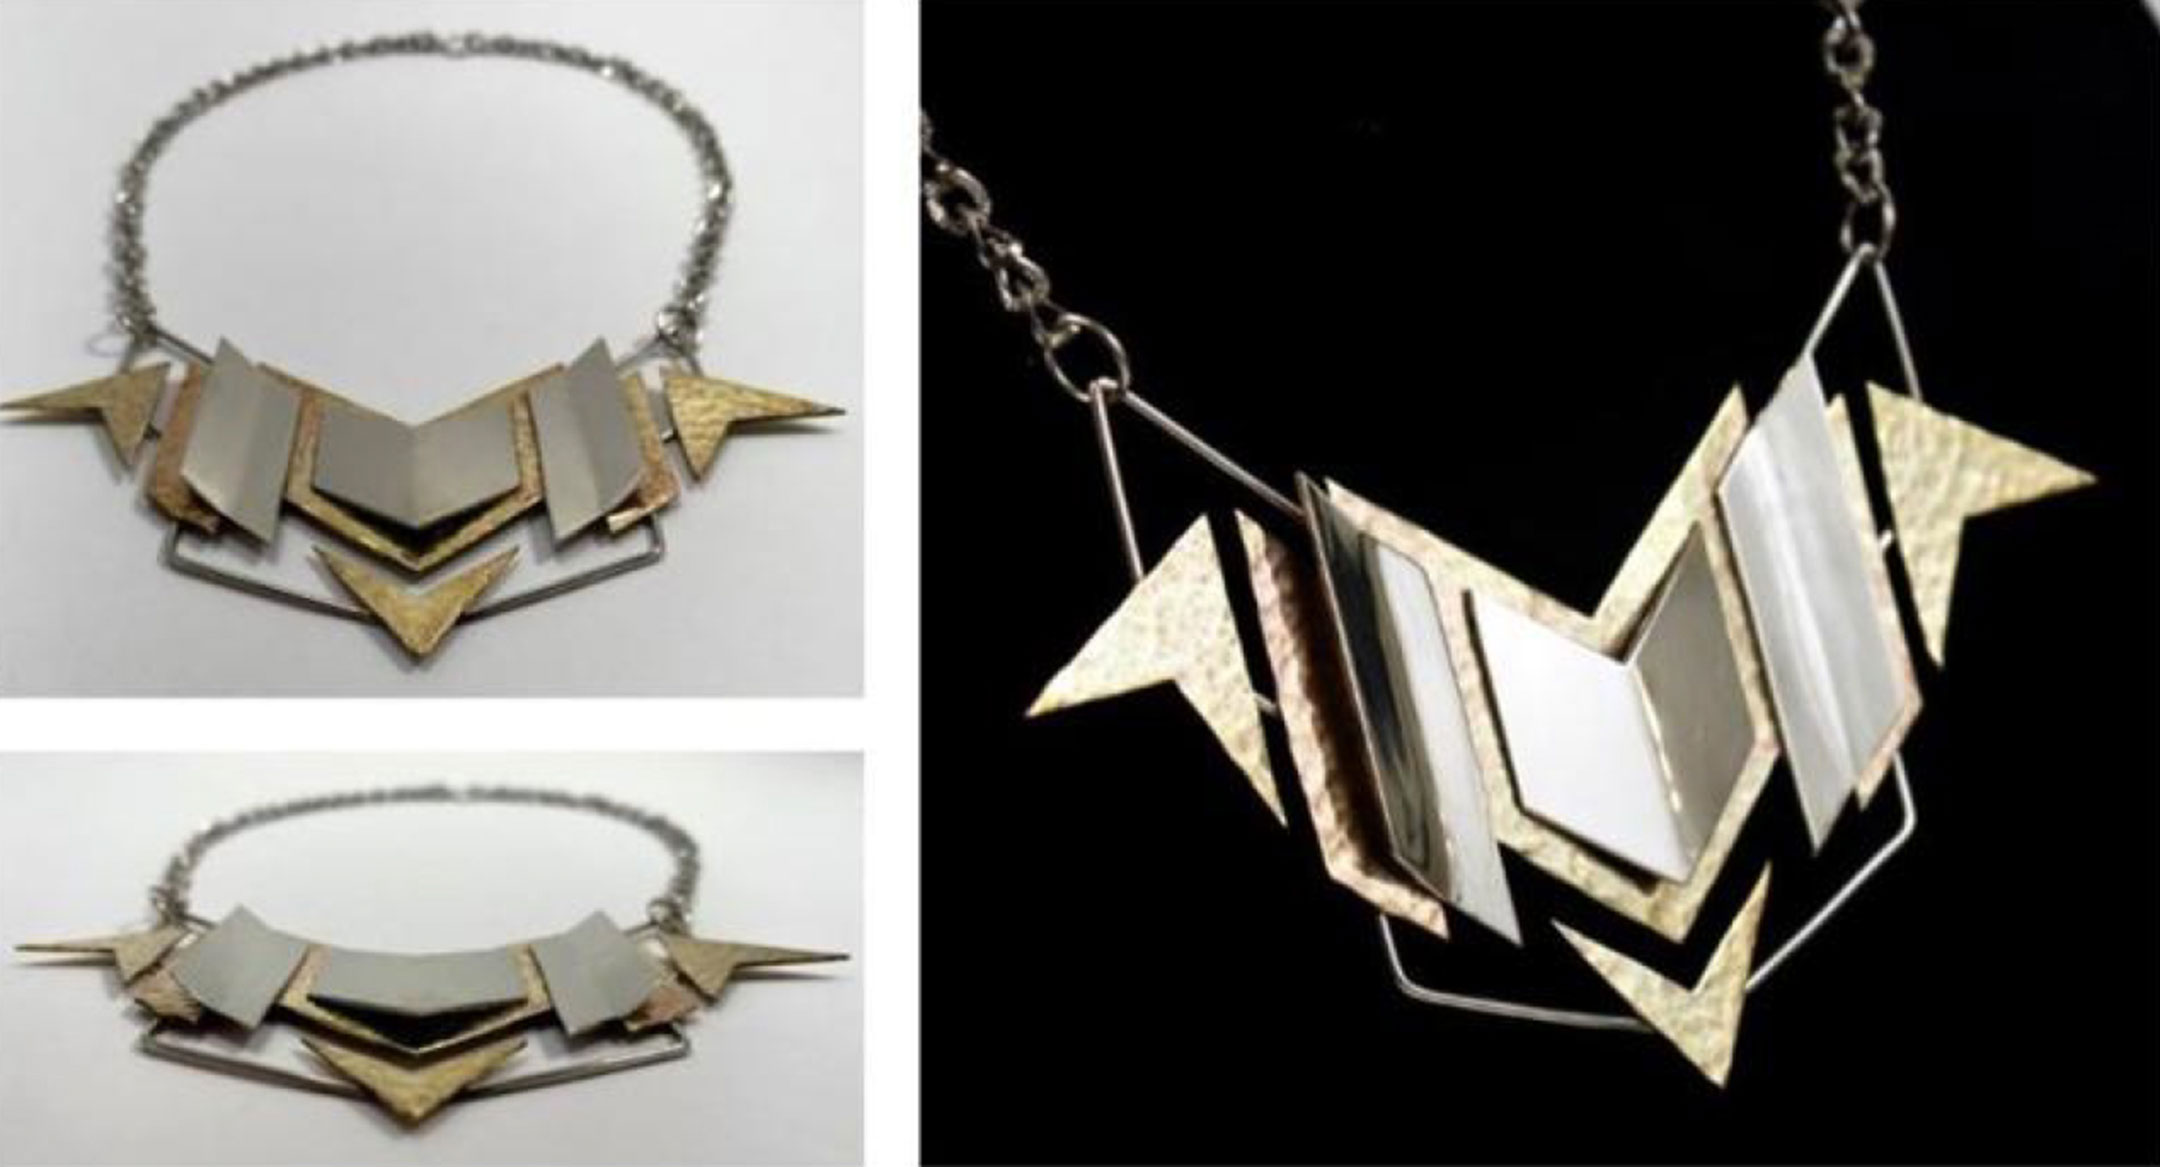 Three photos showing a bat-like metal necklace